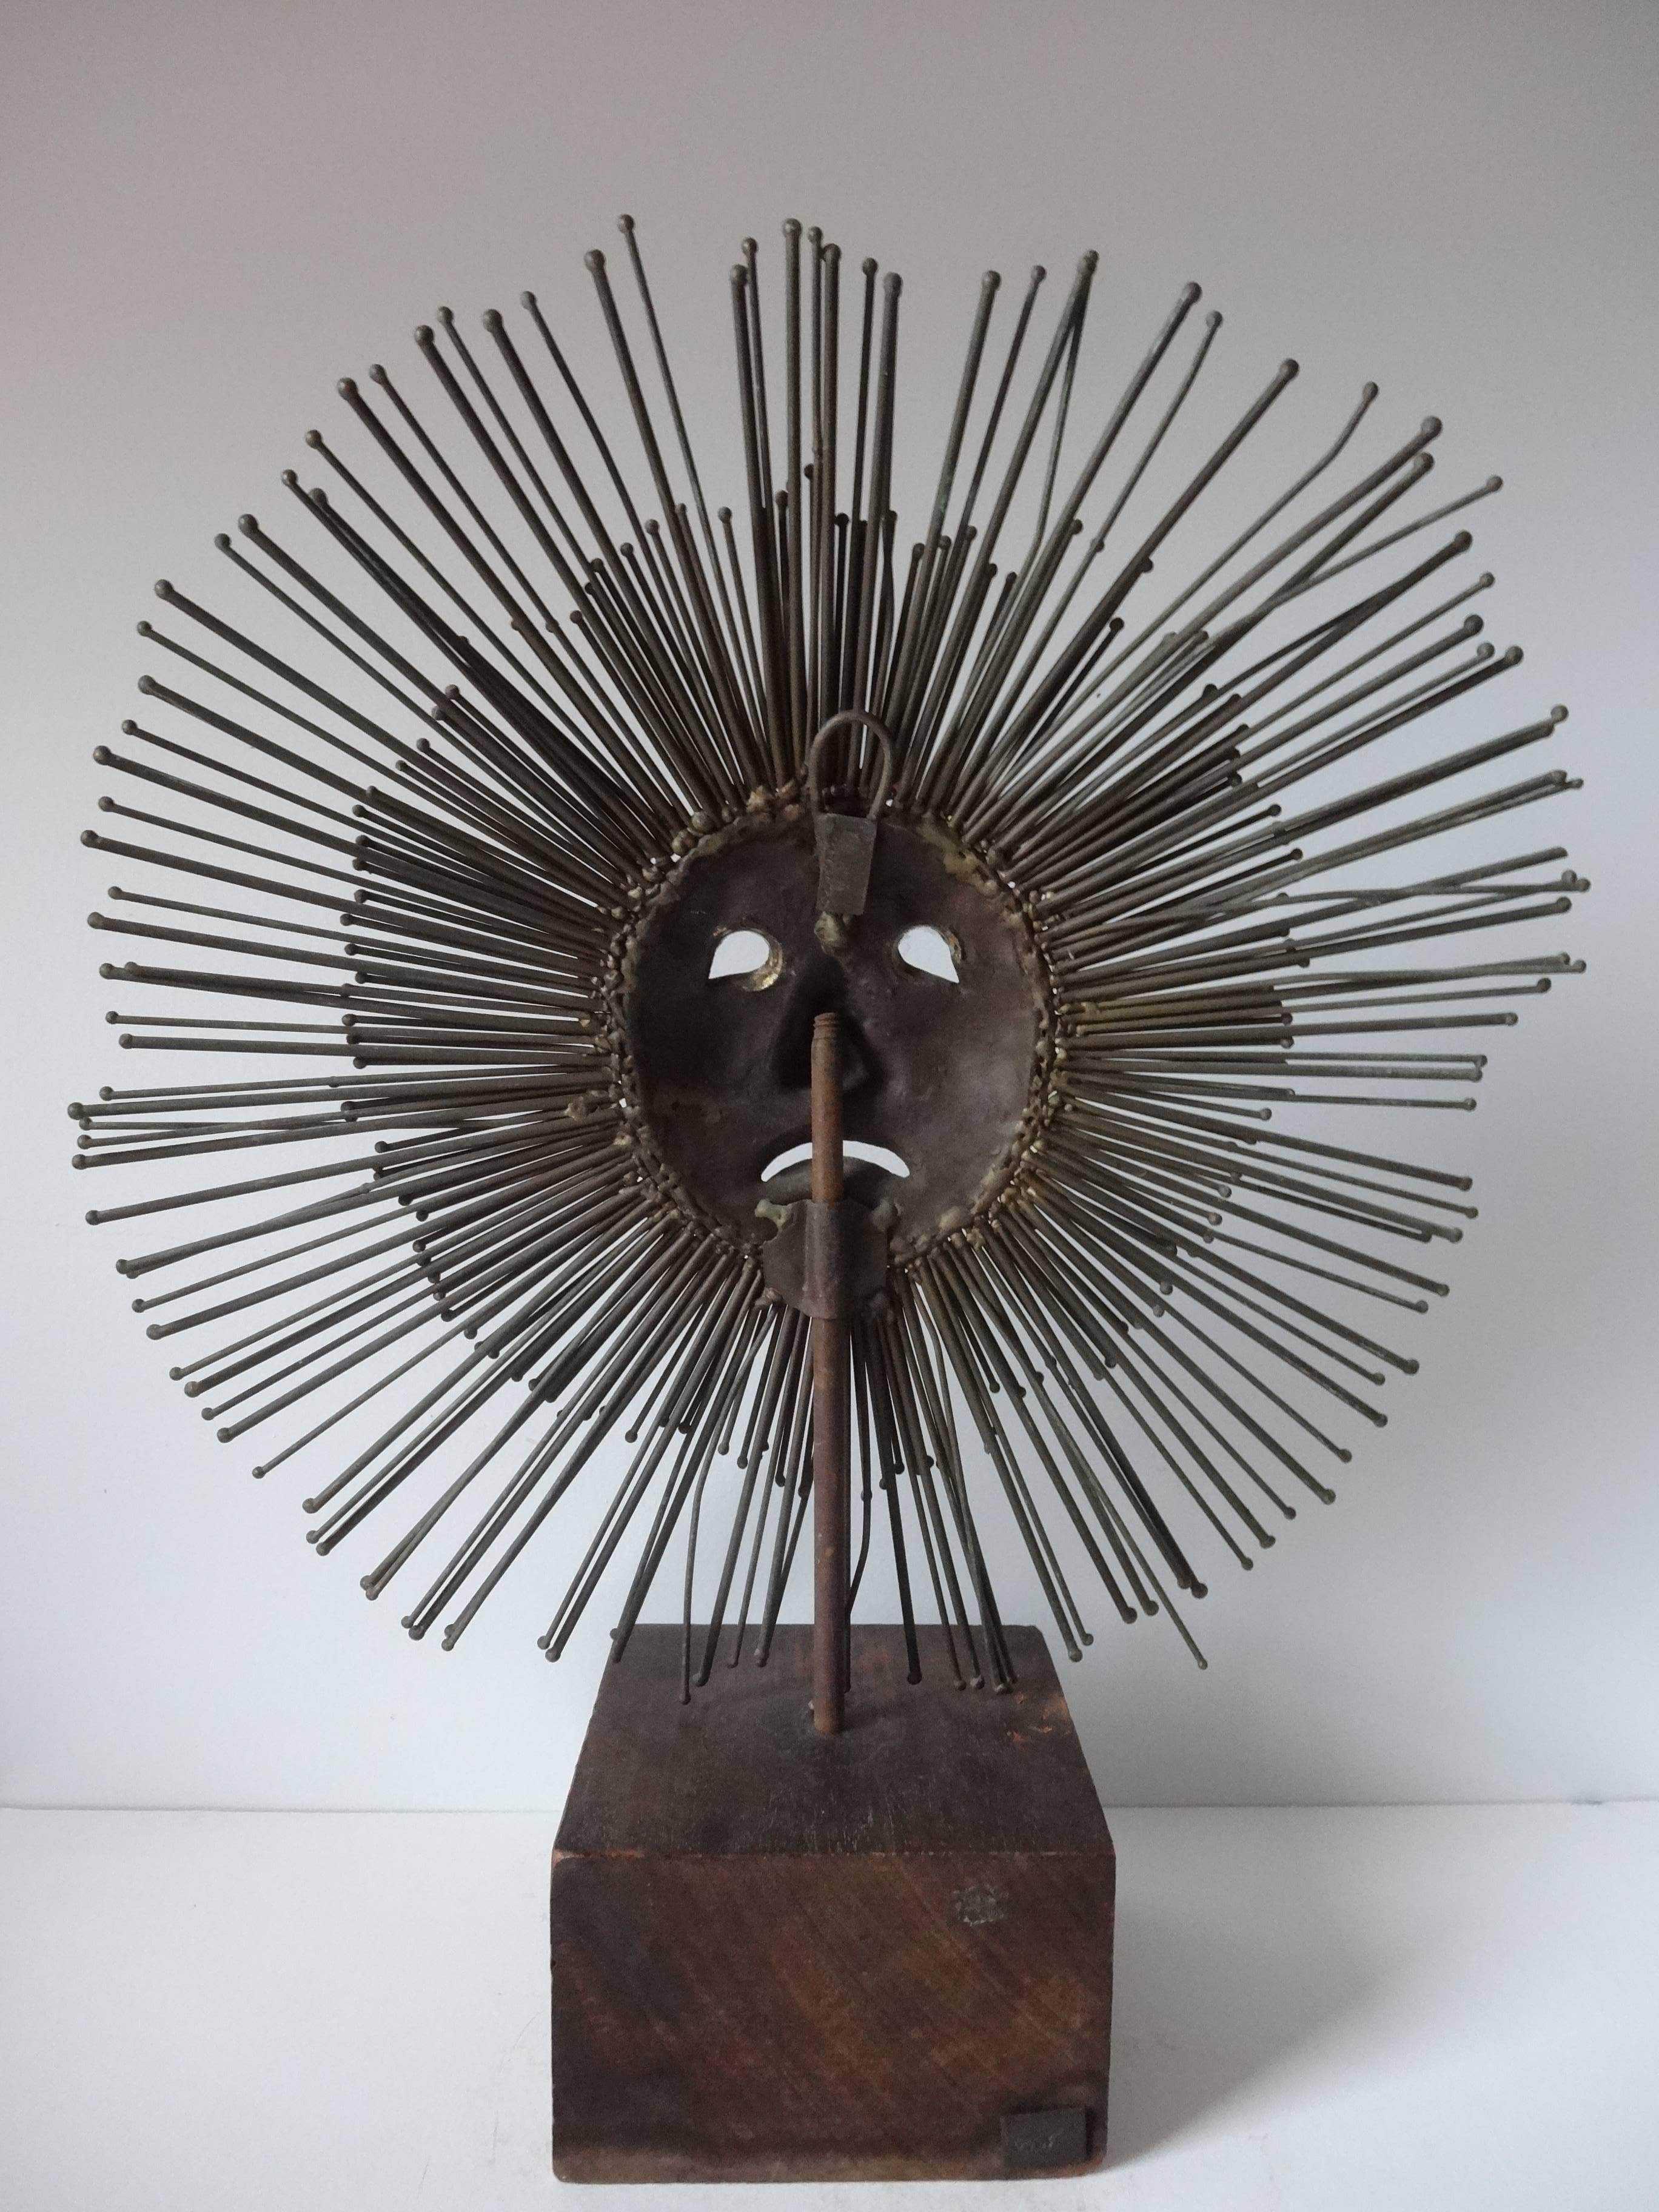 Welded Sun Face Sculpture by Luciano